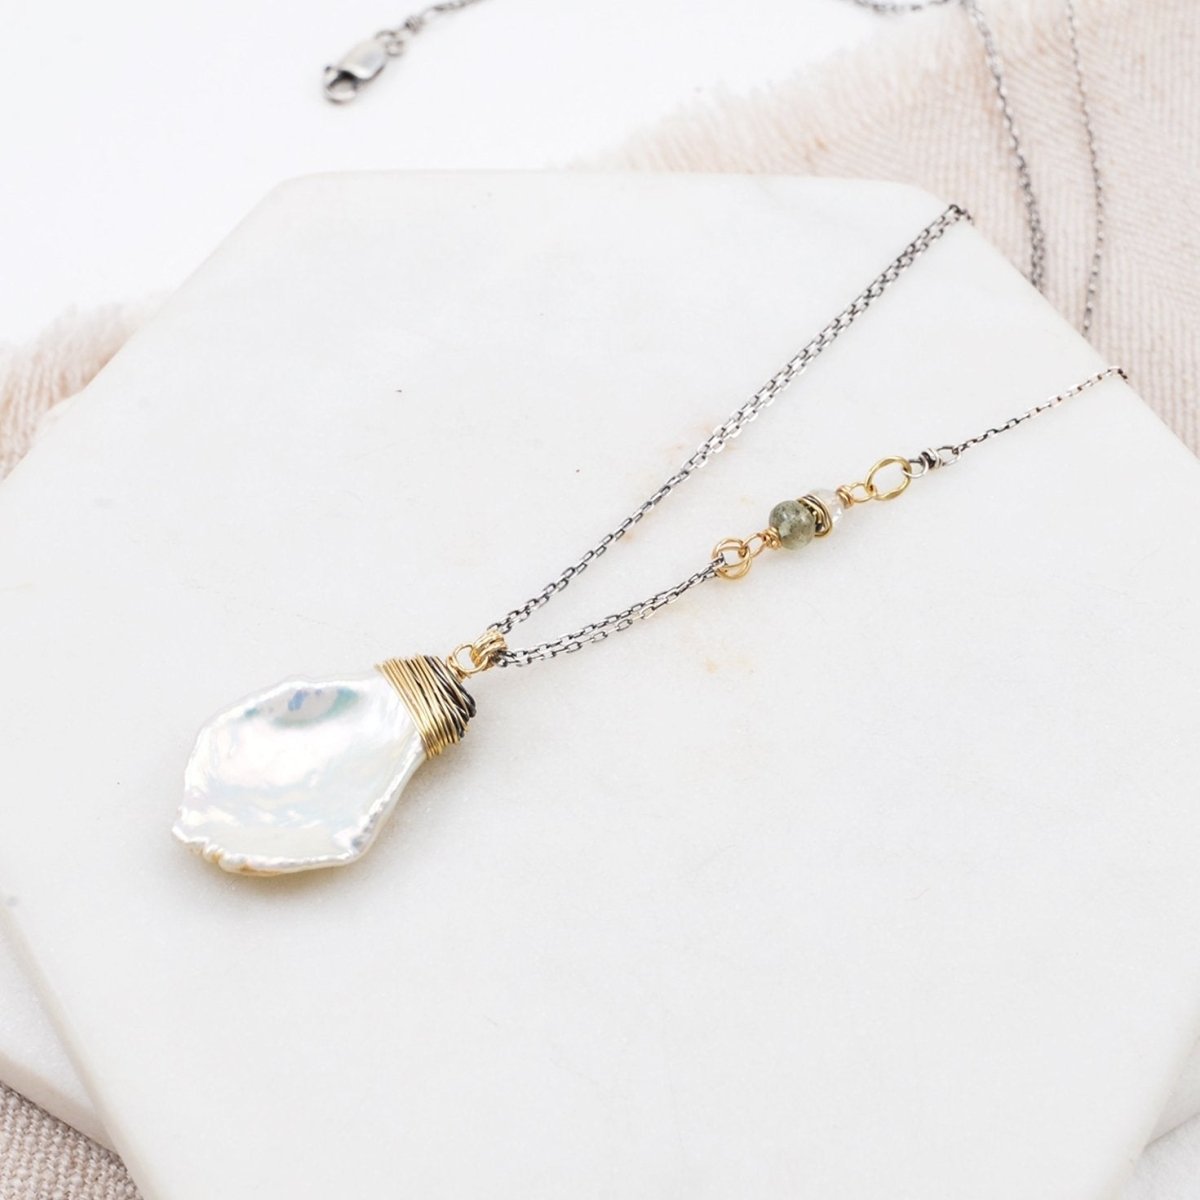 A freshwater pearl pendant hangs from sterling silver chain with aquamarine and citrine accent. The Paige Necklace is designed and handcrafted by Amy Olson in Portland, Oregon.